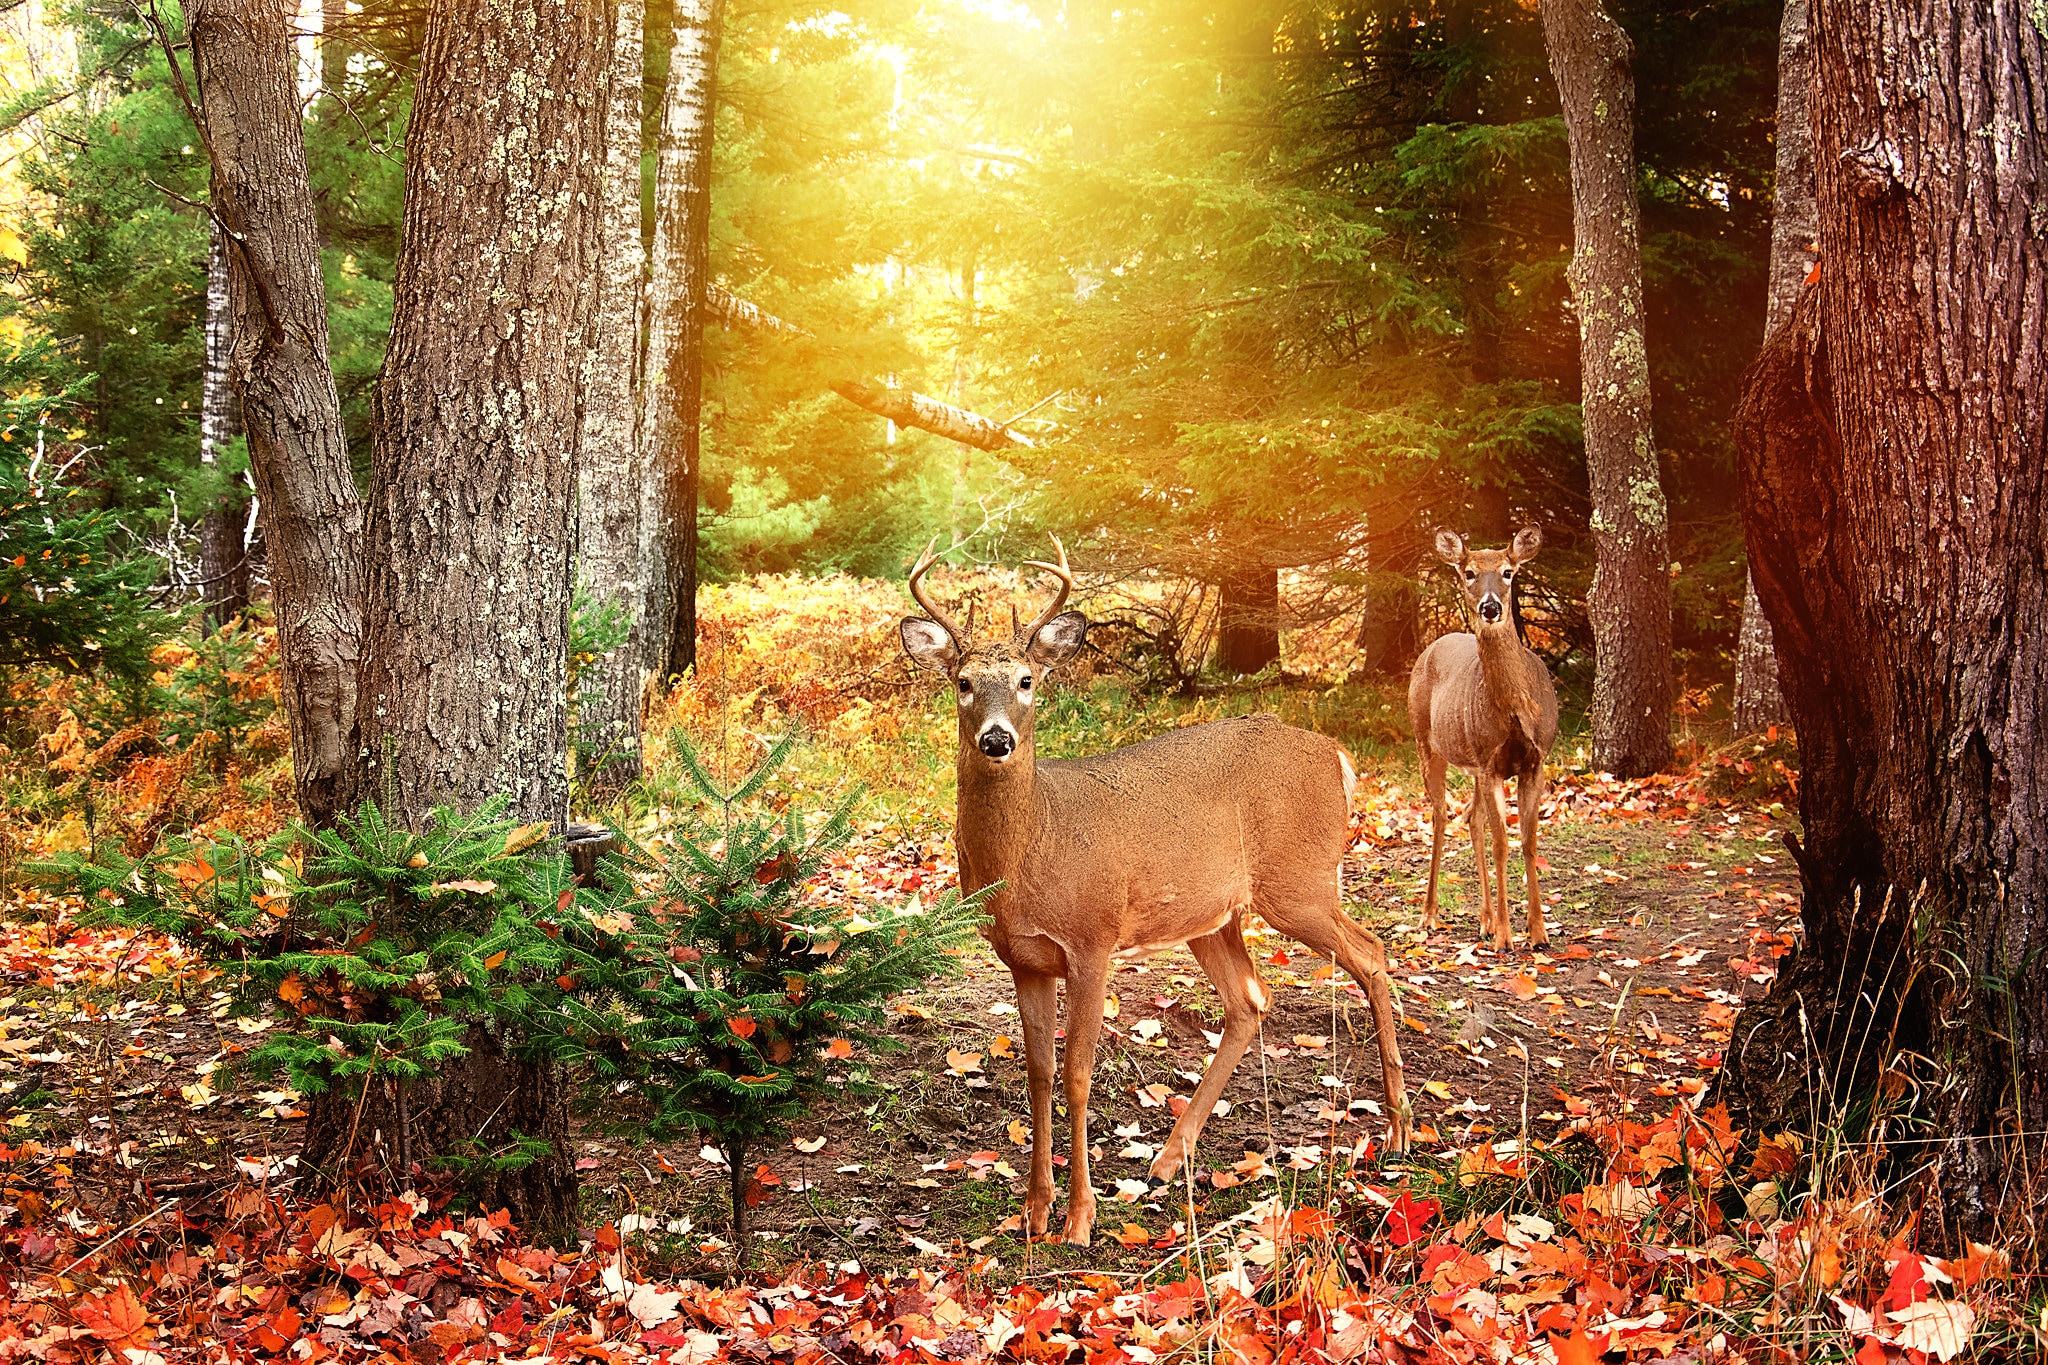 Buck at Sunset Wall Art, Whitetail Deer Autumn Wall Decor, Autumn Photo,  Forest Fall Colors, Woodland Deer Card, Deer in the Forest Print 